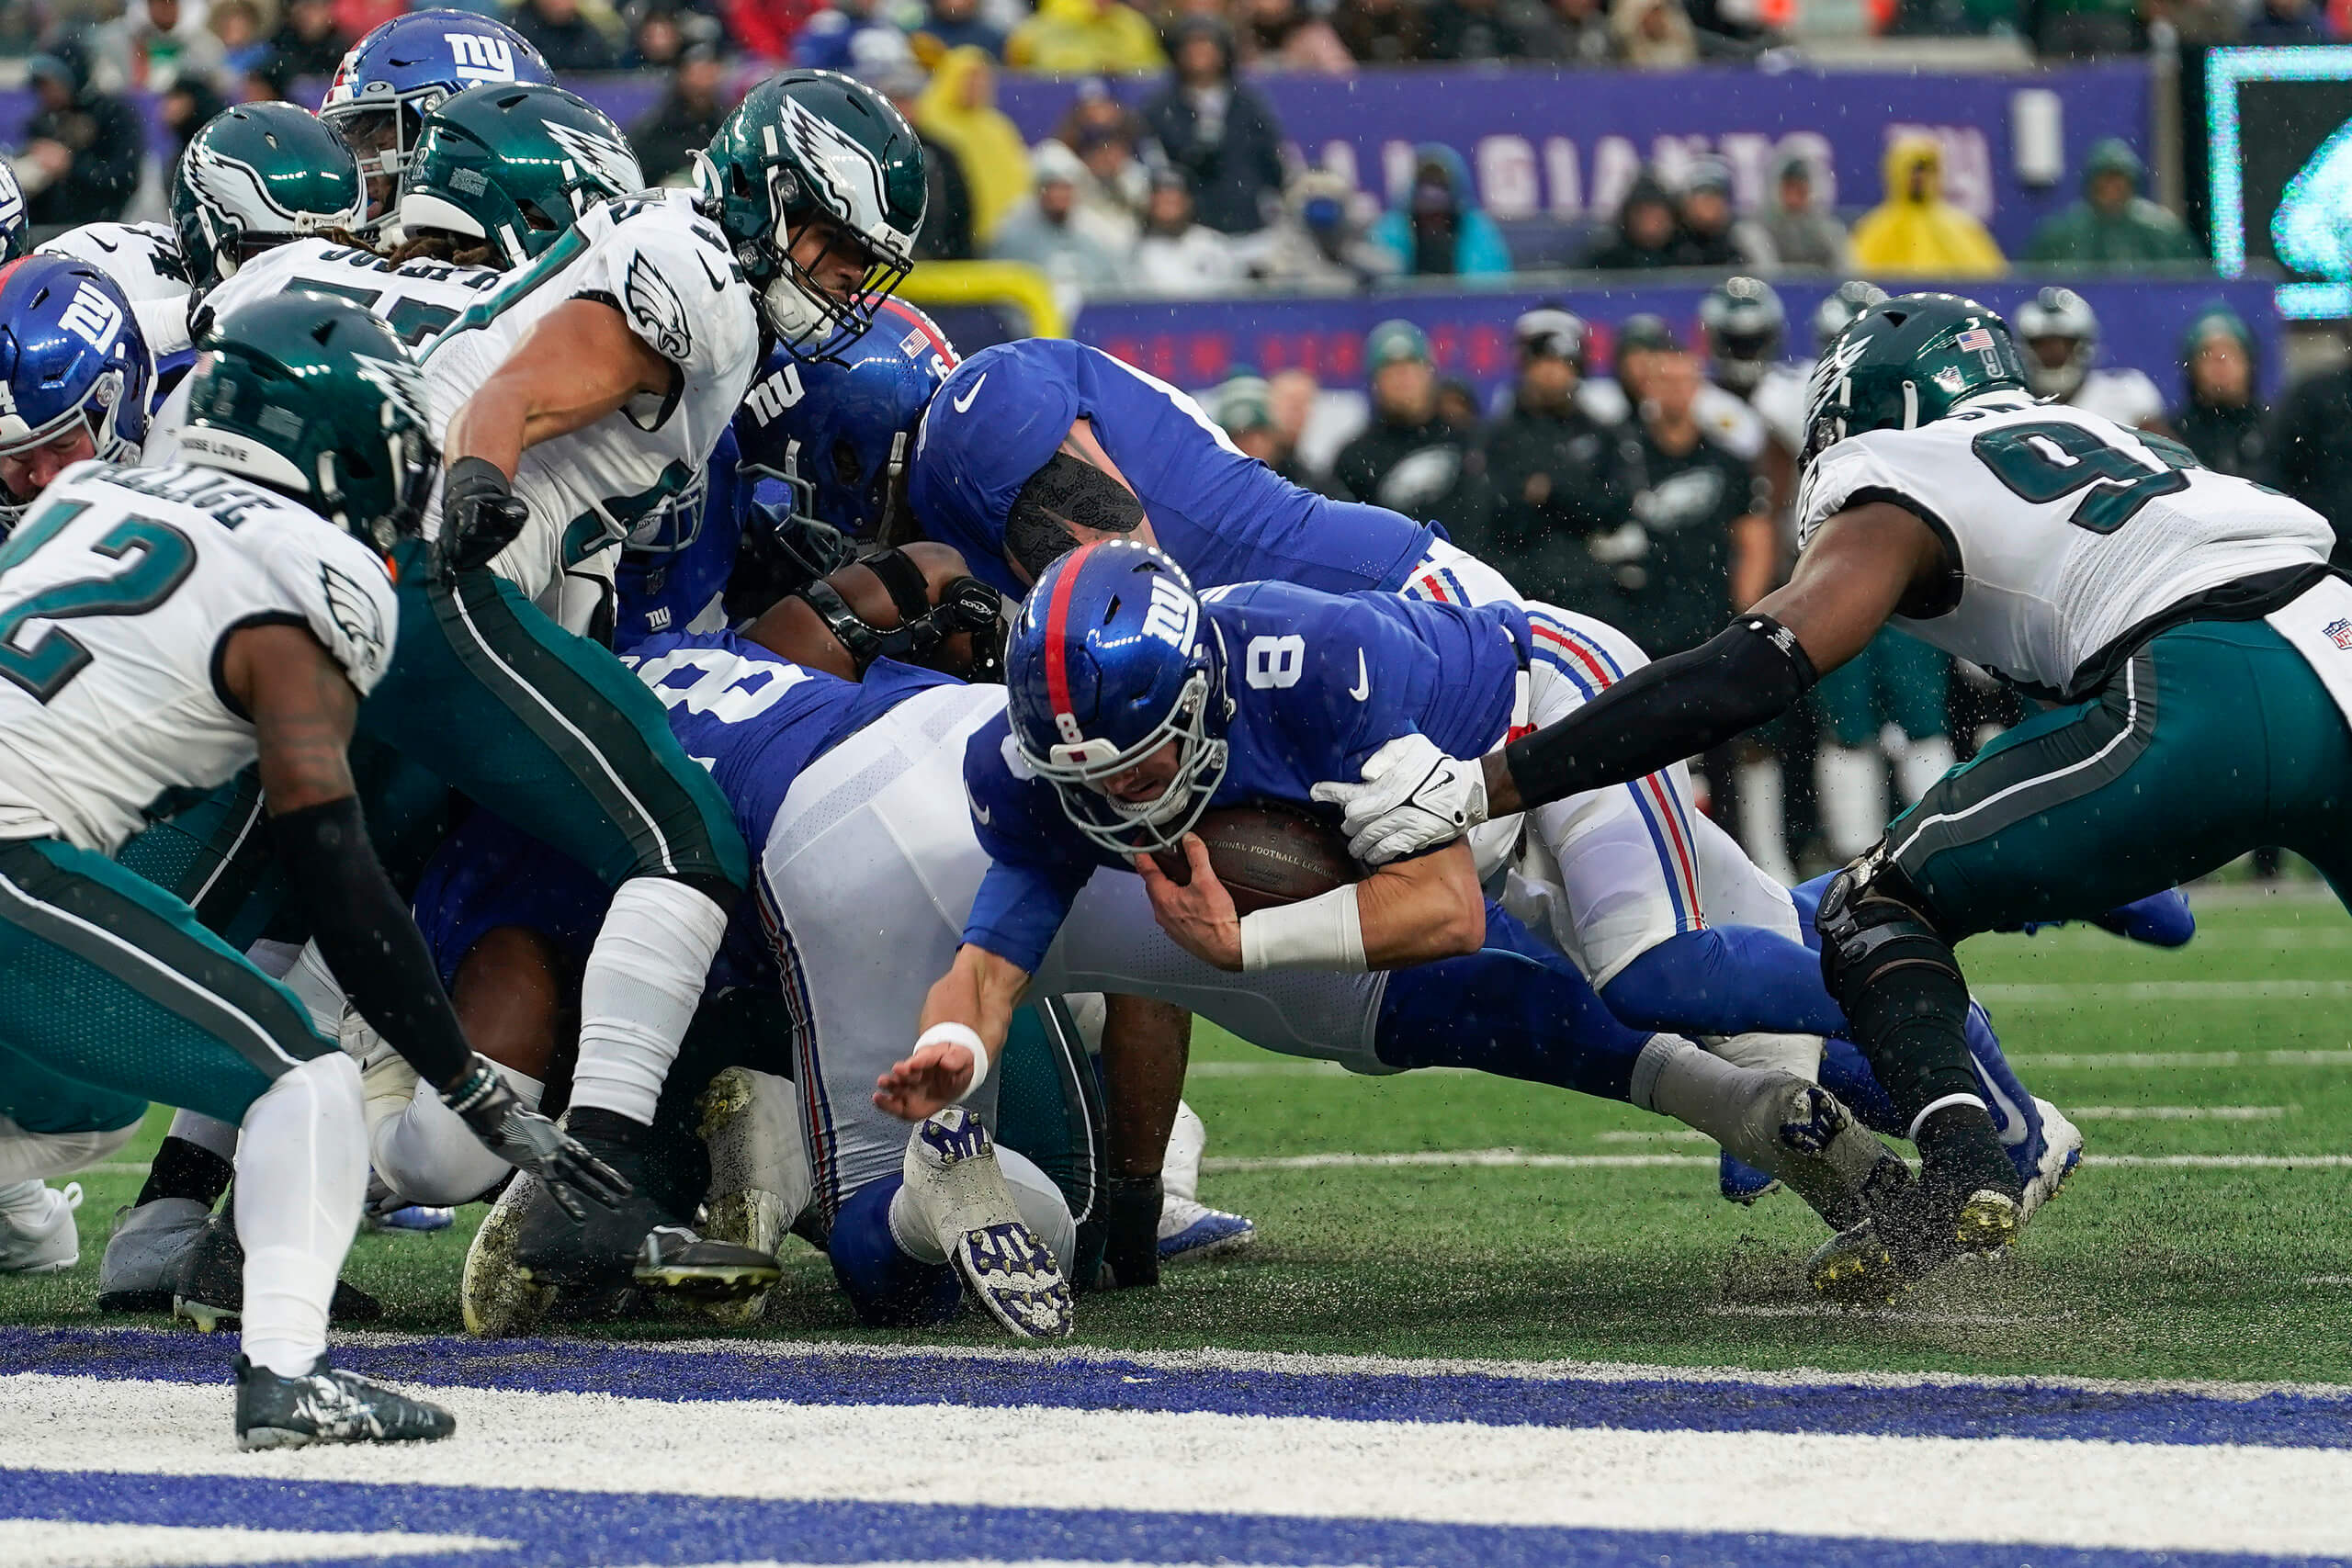 Hurts, Eagles clinch playoffs with 48-22 win over Giants - WHYY